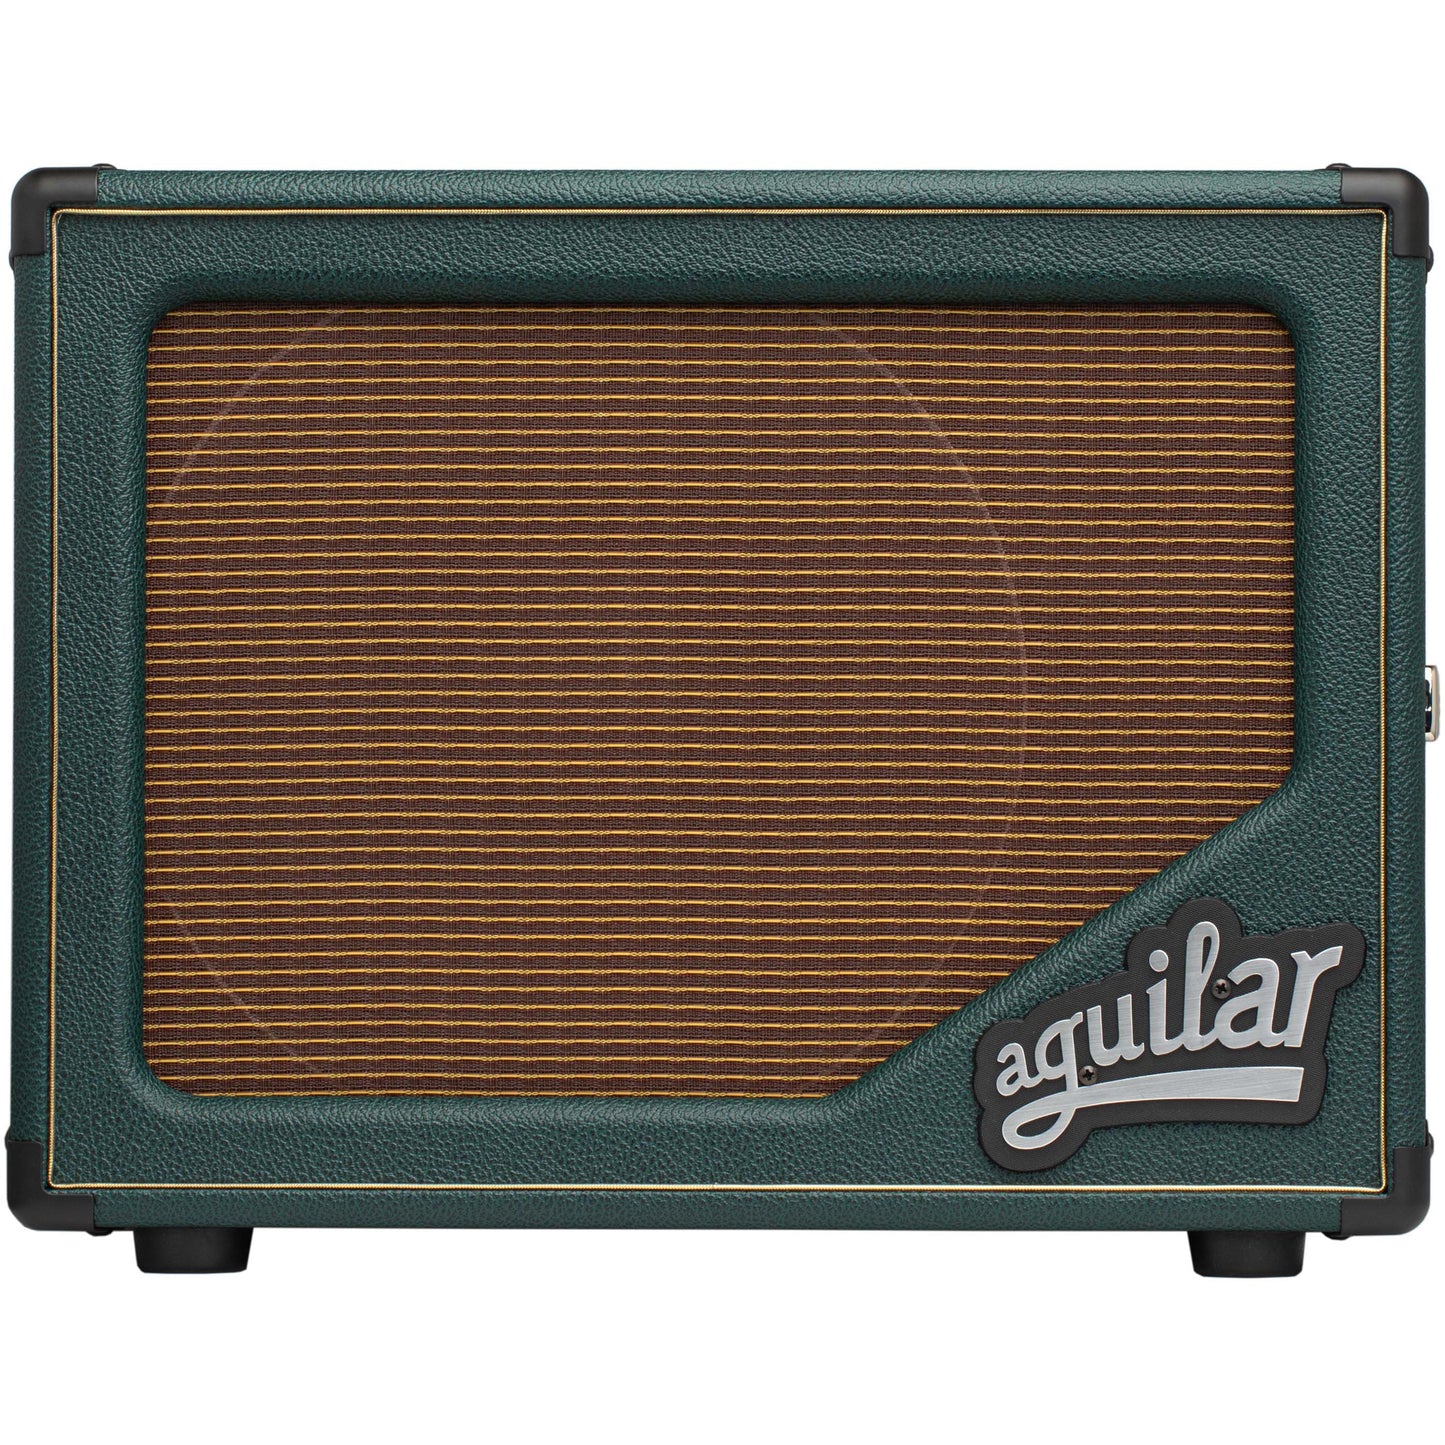 Aguilar Limited Edition SL112 Cabinet - Racing Green